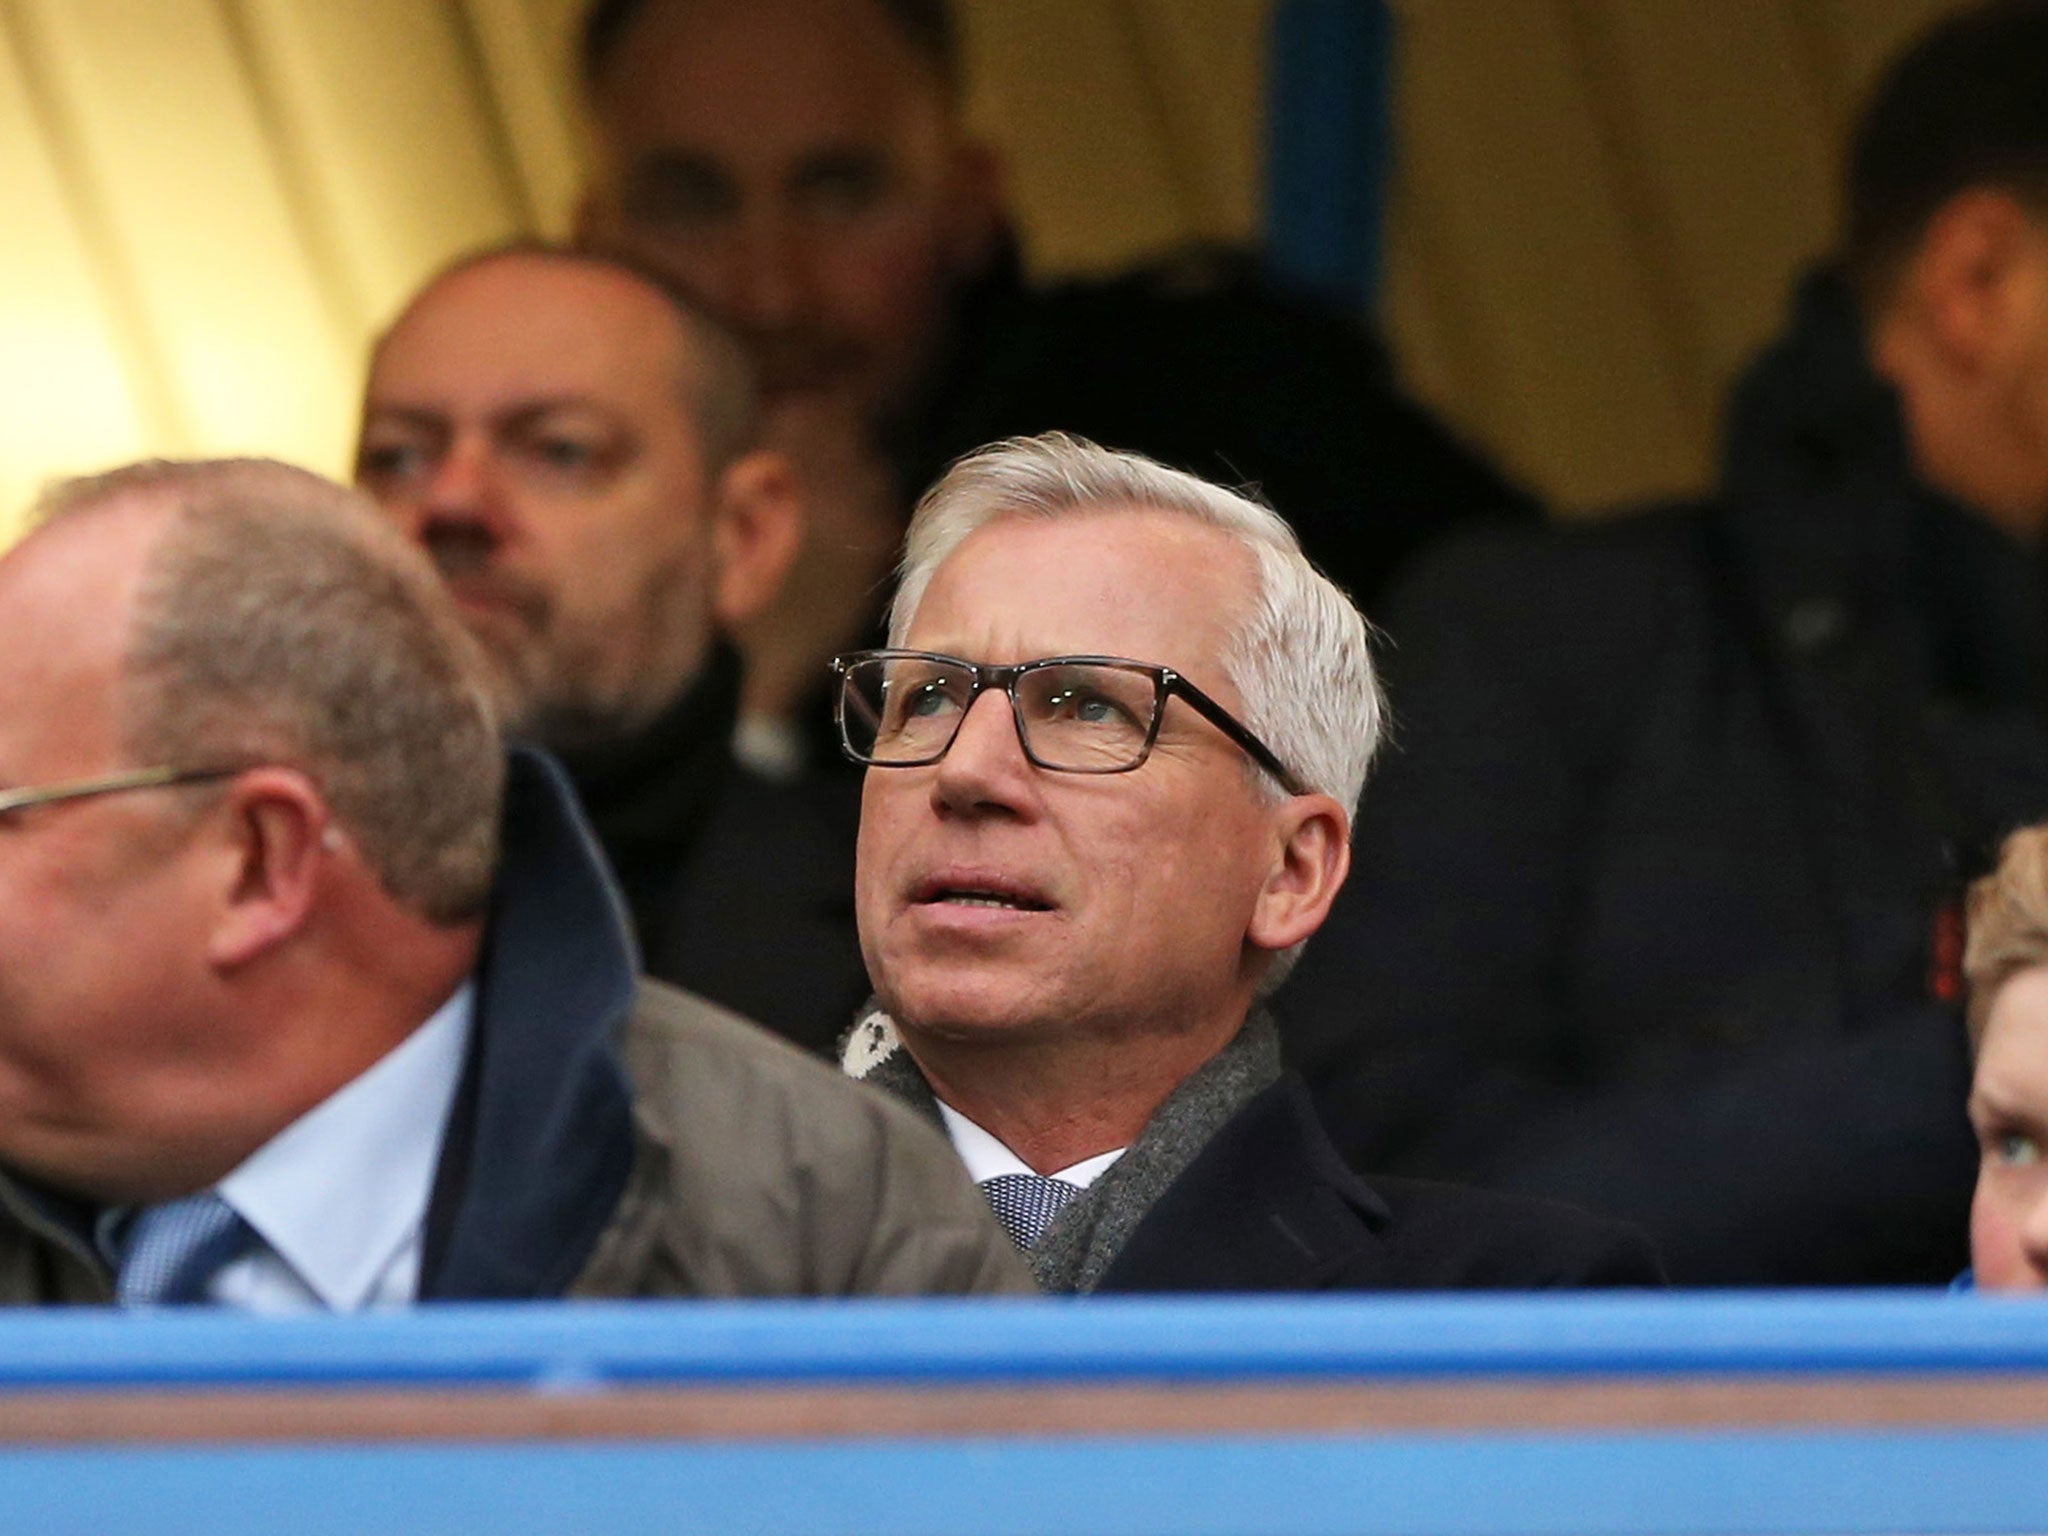 Alan Pardew is currently looking for work